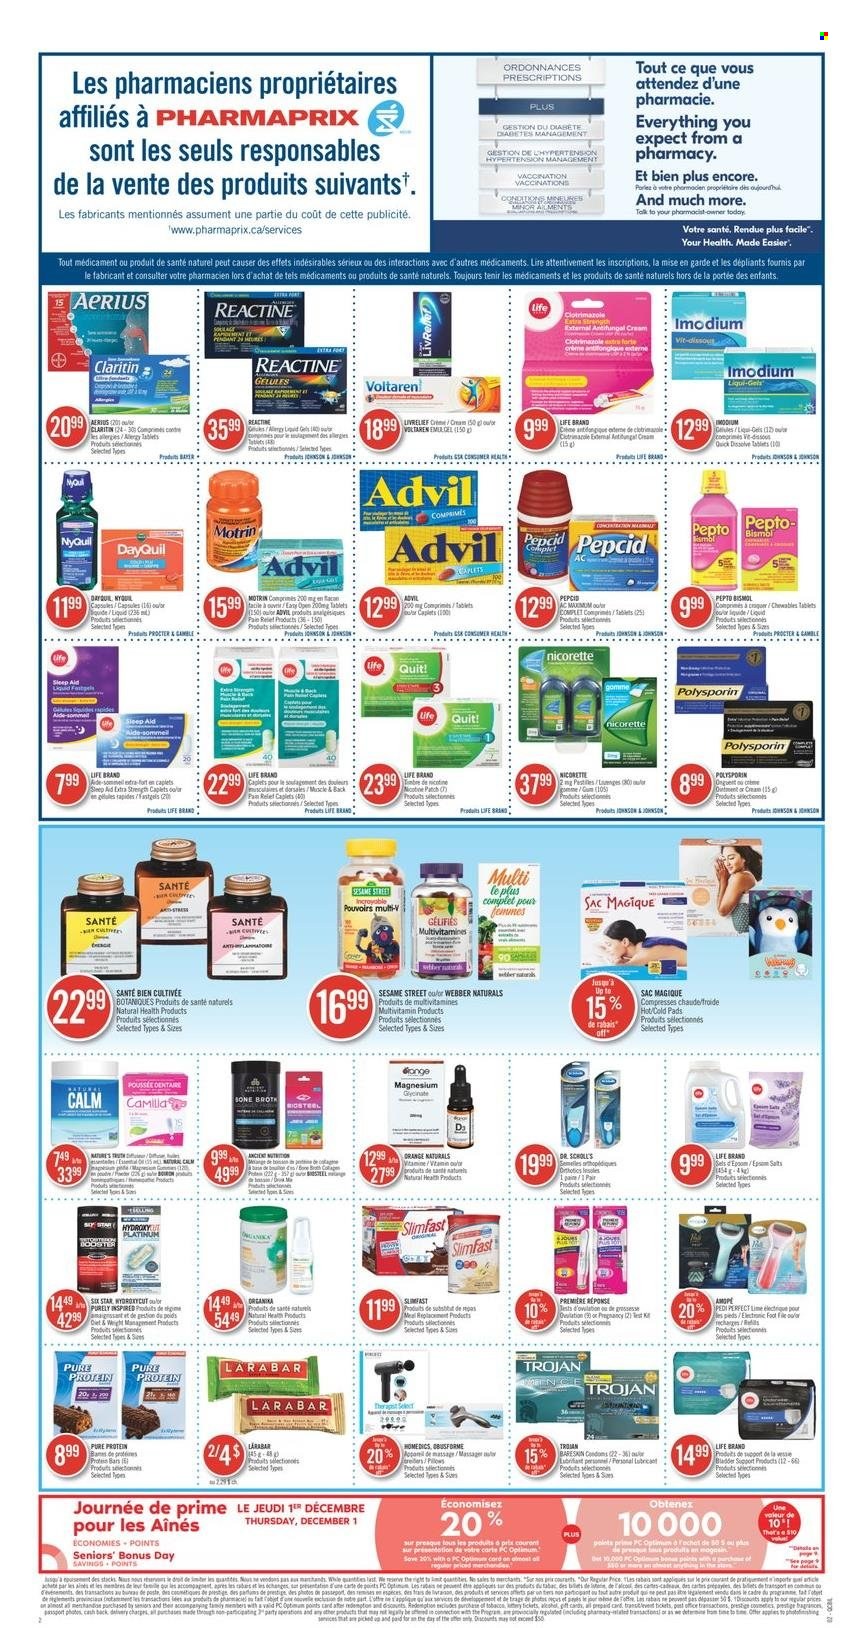 thumbnail - Pharmaprix Flyer - November 26, 2022 - December 02, 2022 - Sales products - oranges, Slimfast, Sesame Street, protein bar, Johnson's, lubricant, lid, Optimum, massager, pendant, pain relief, Cosamin, DayQuil, magnesium, multivitamin, Nature's Truth, Nicorette, Pepcid, NyQuil, Advil Rapid, Bayer, Motrin, Dr. Scholl's, Imodium. Page 2.